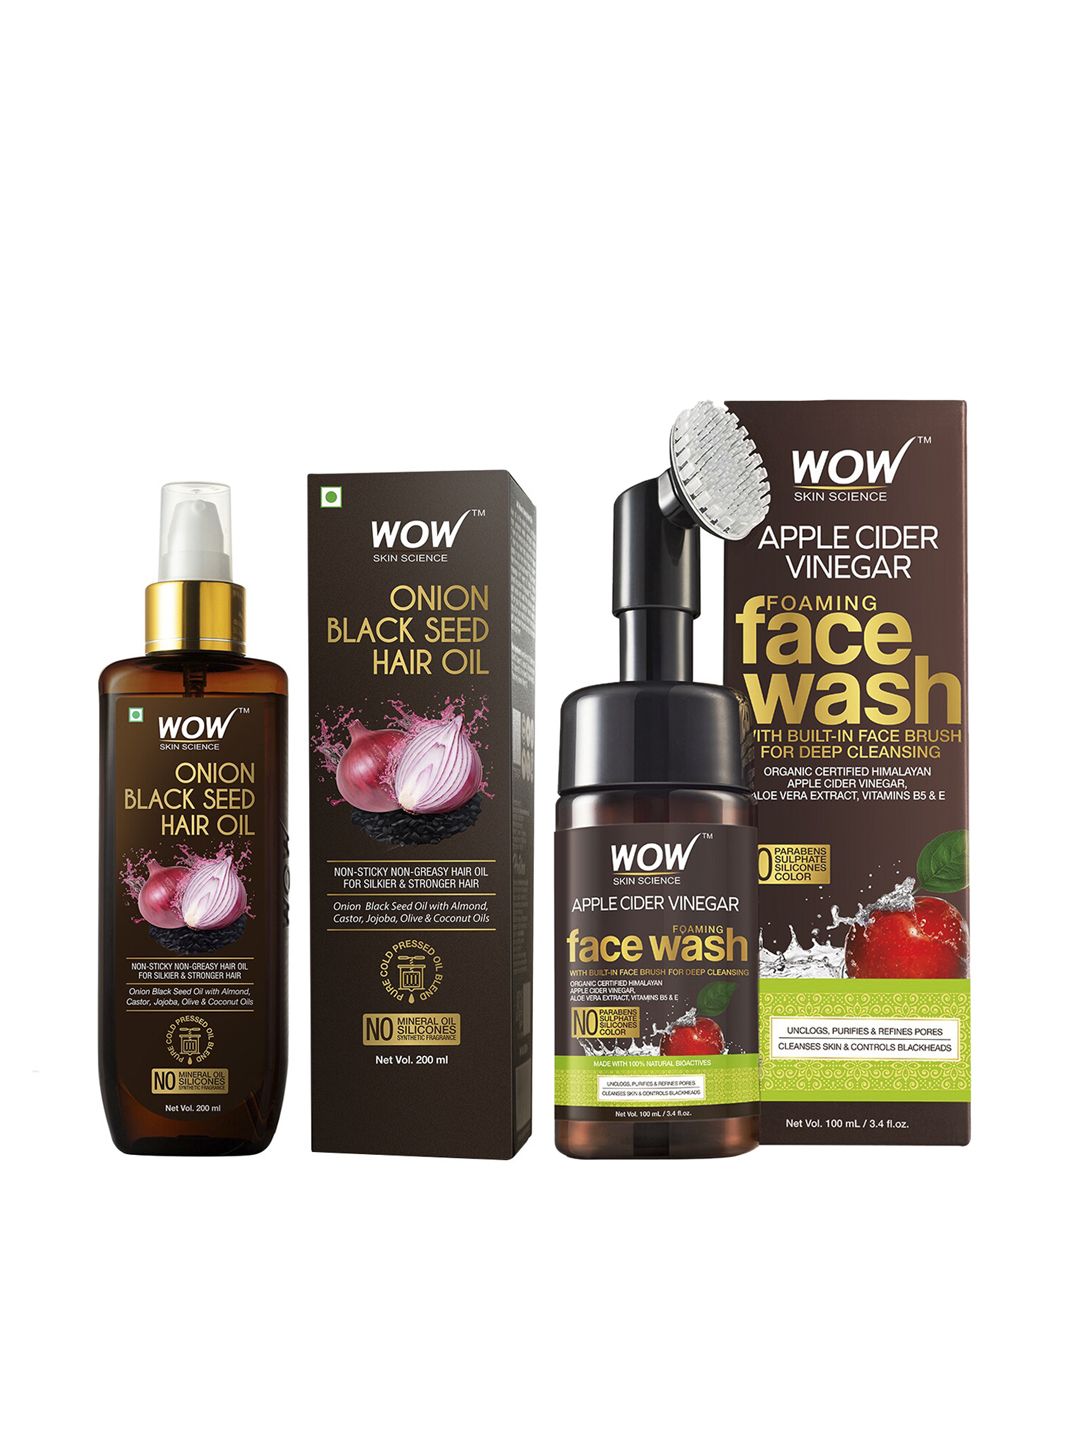 WOW SKIN SCIENCE Set of Onion Black Seed Hair Oil & Apple Cider Vinegar Foaming Face Wash Price in India